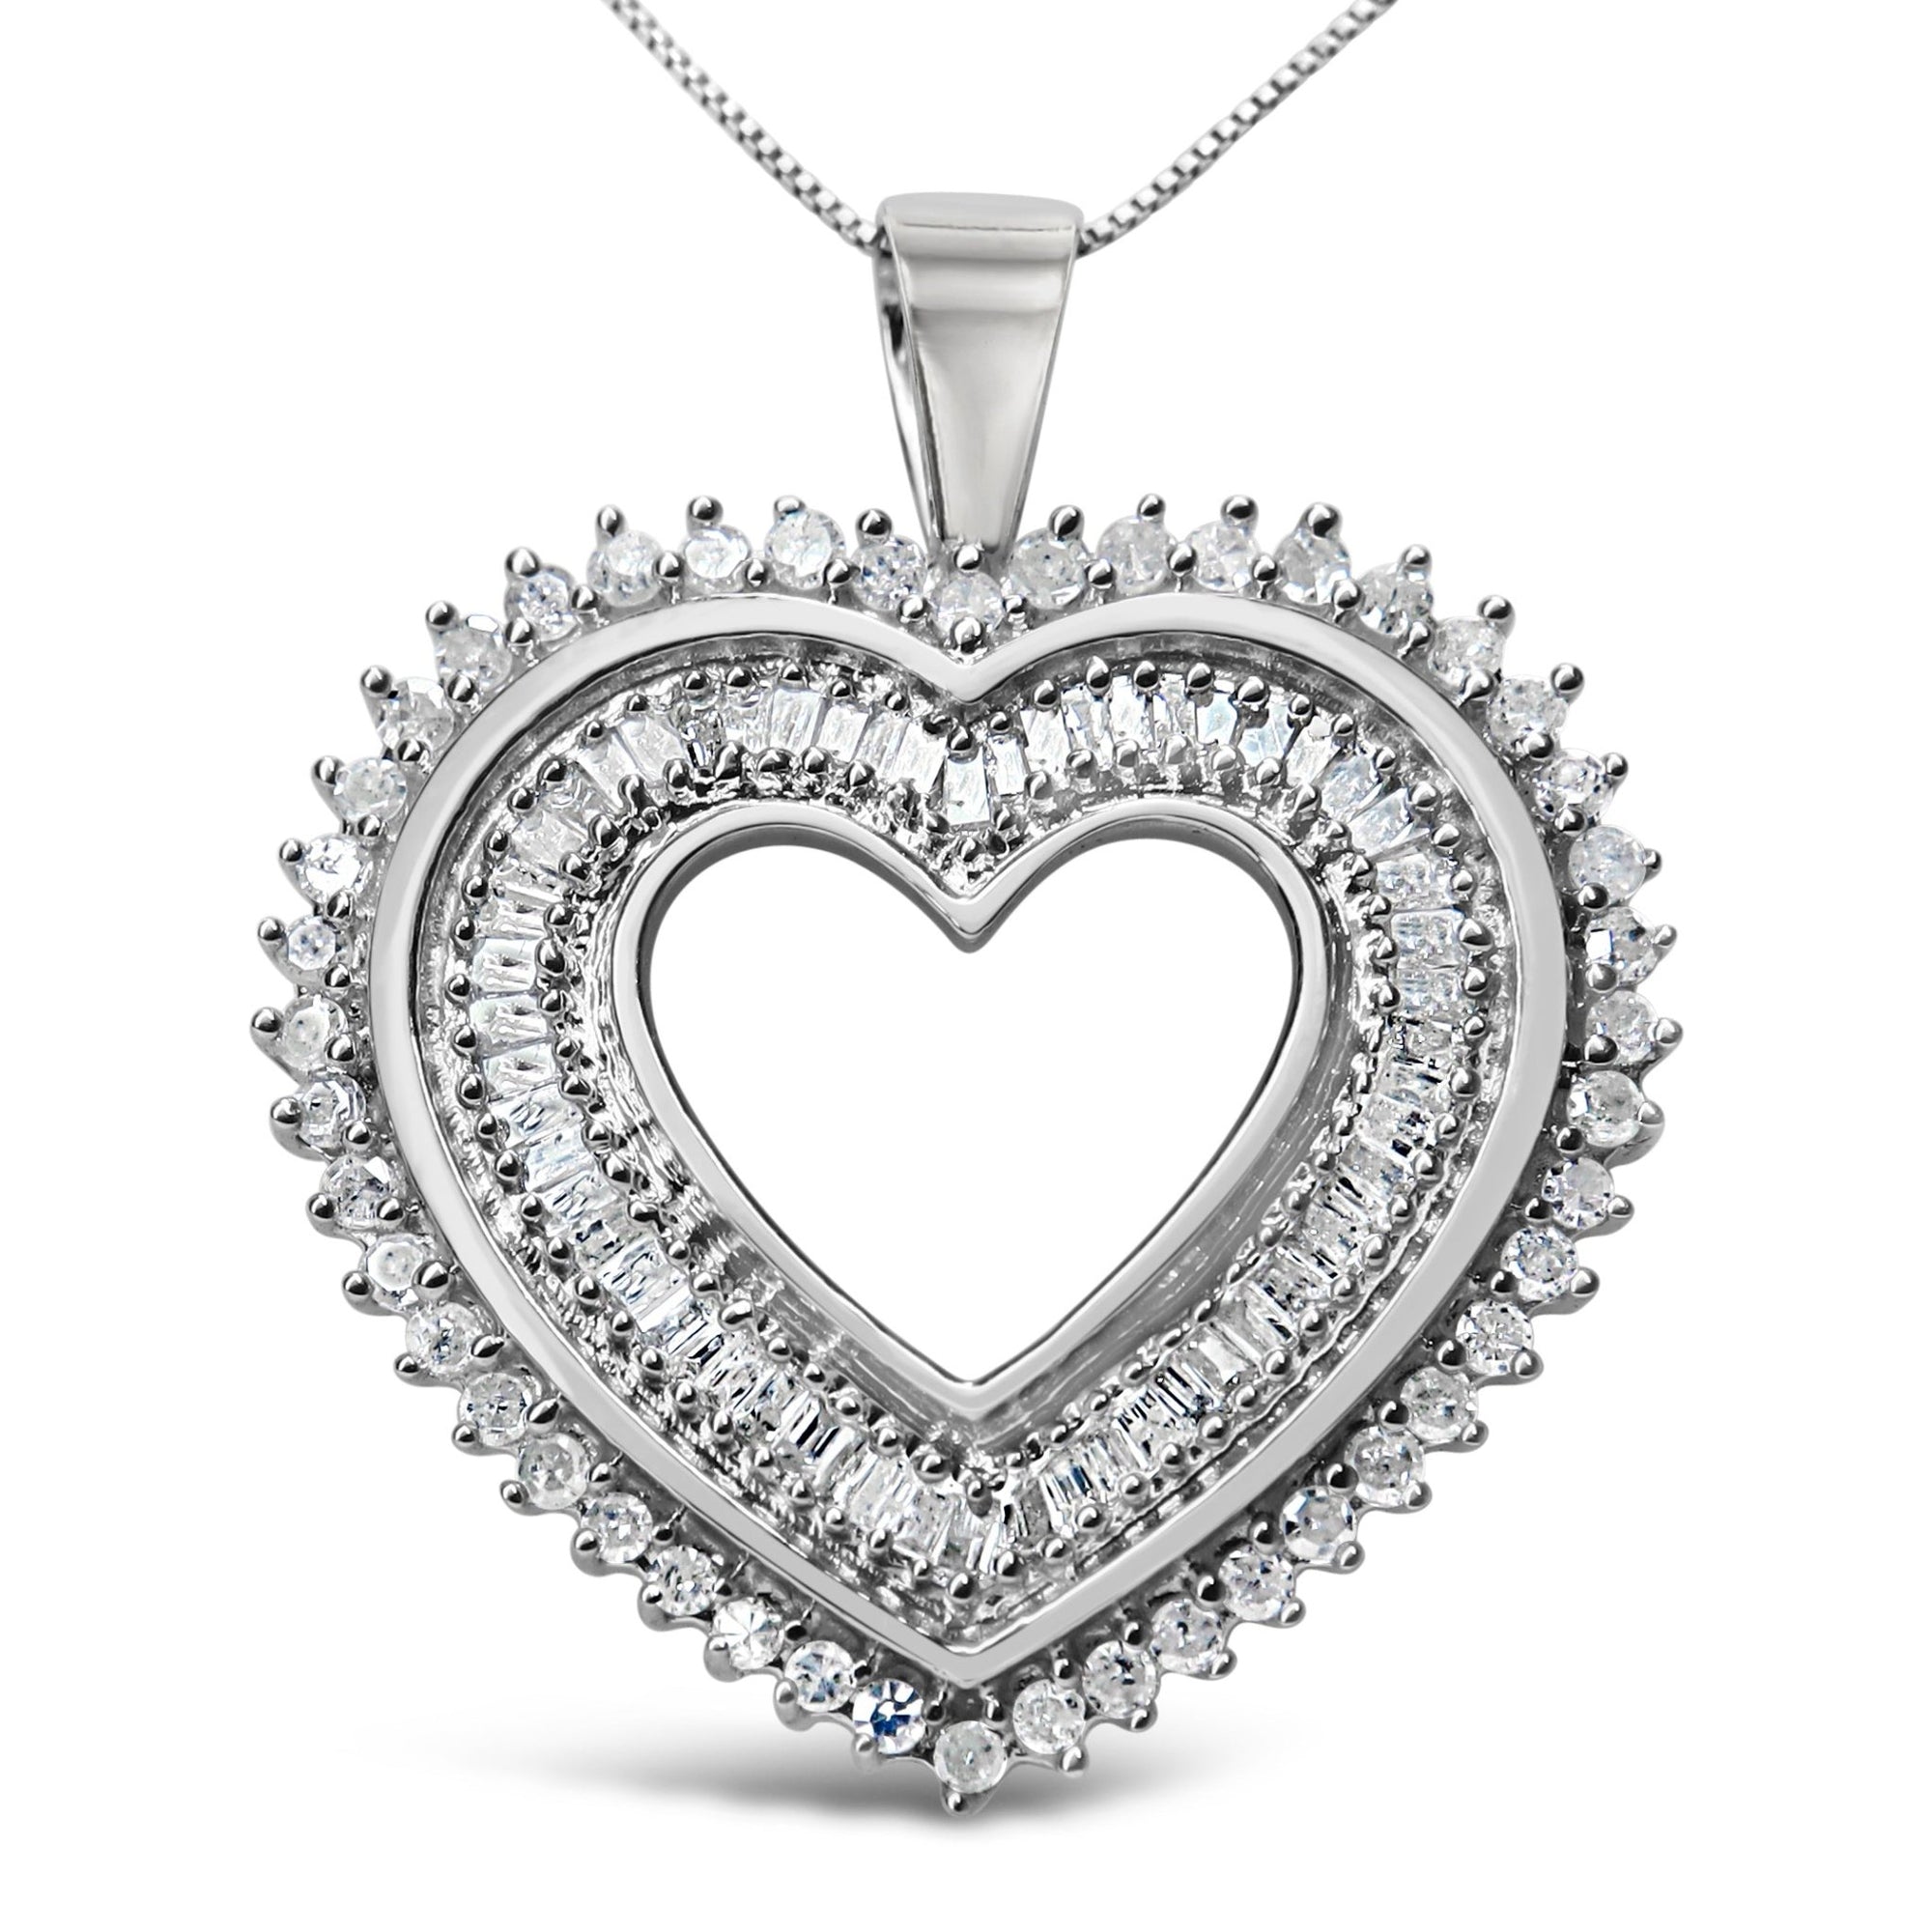 .925 Sterling Silver 1.0 Cttw Baguette and Round Diamond Heart Pendant 18" Necklace (H-I Color, I3 Clarity) - LinkagejewelrydesignLinkagejewelrydesign